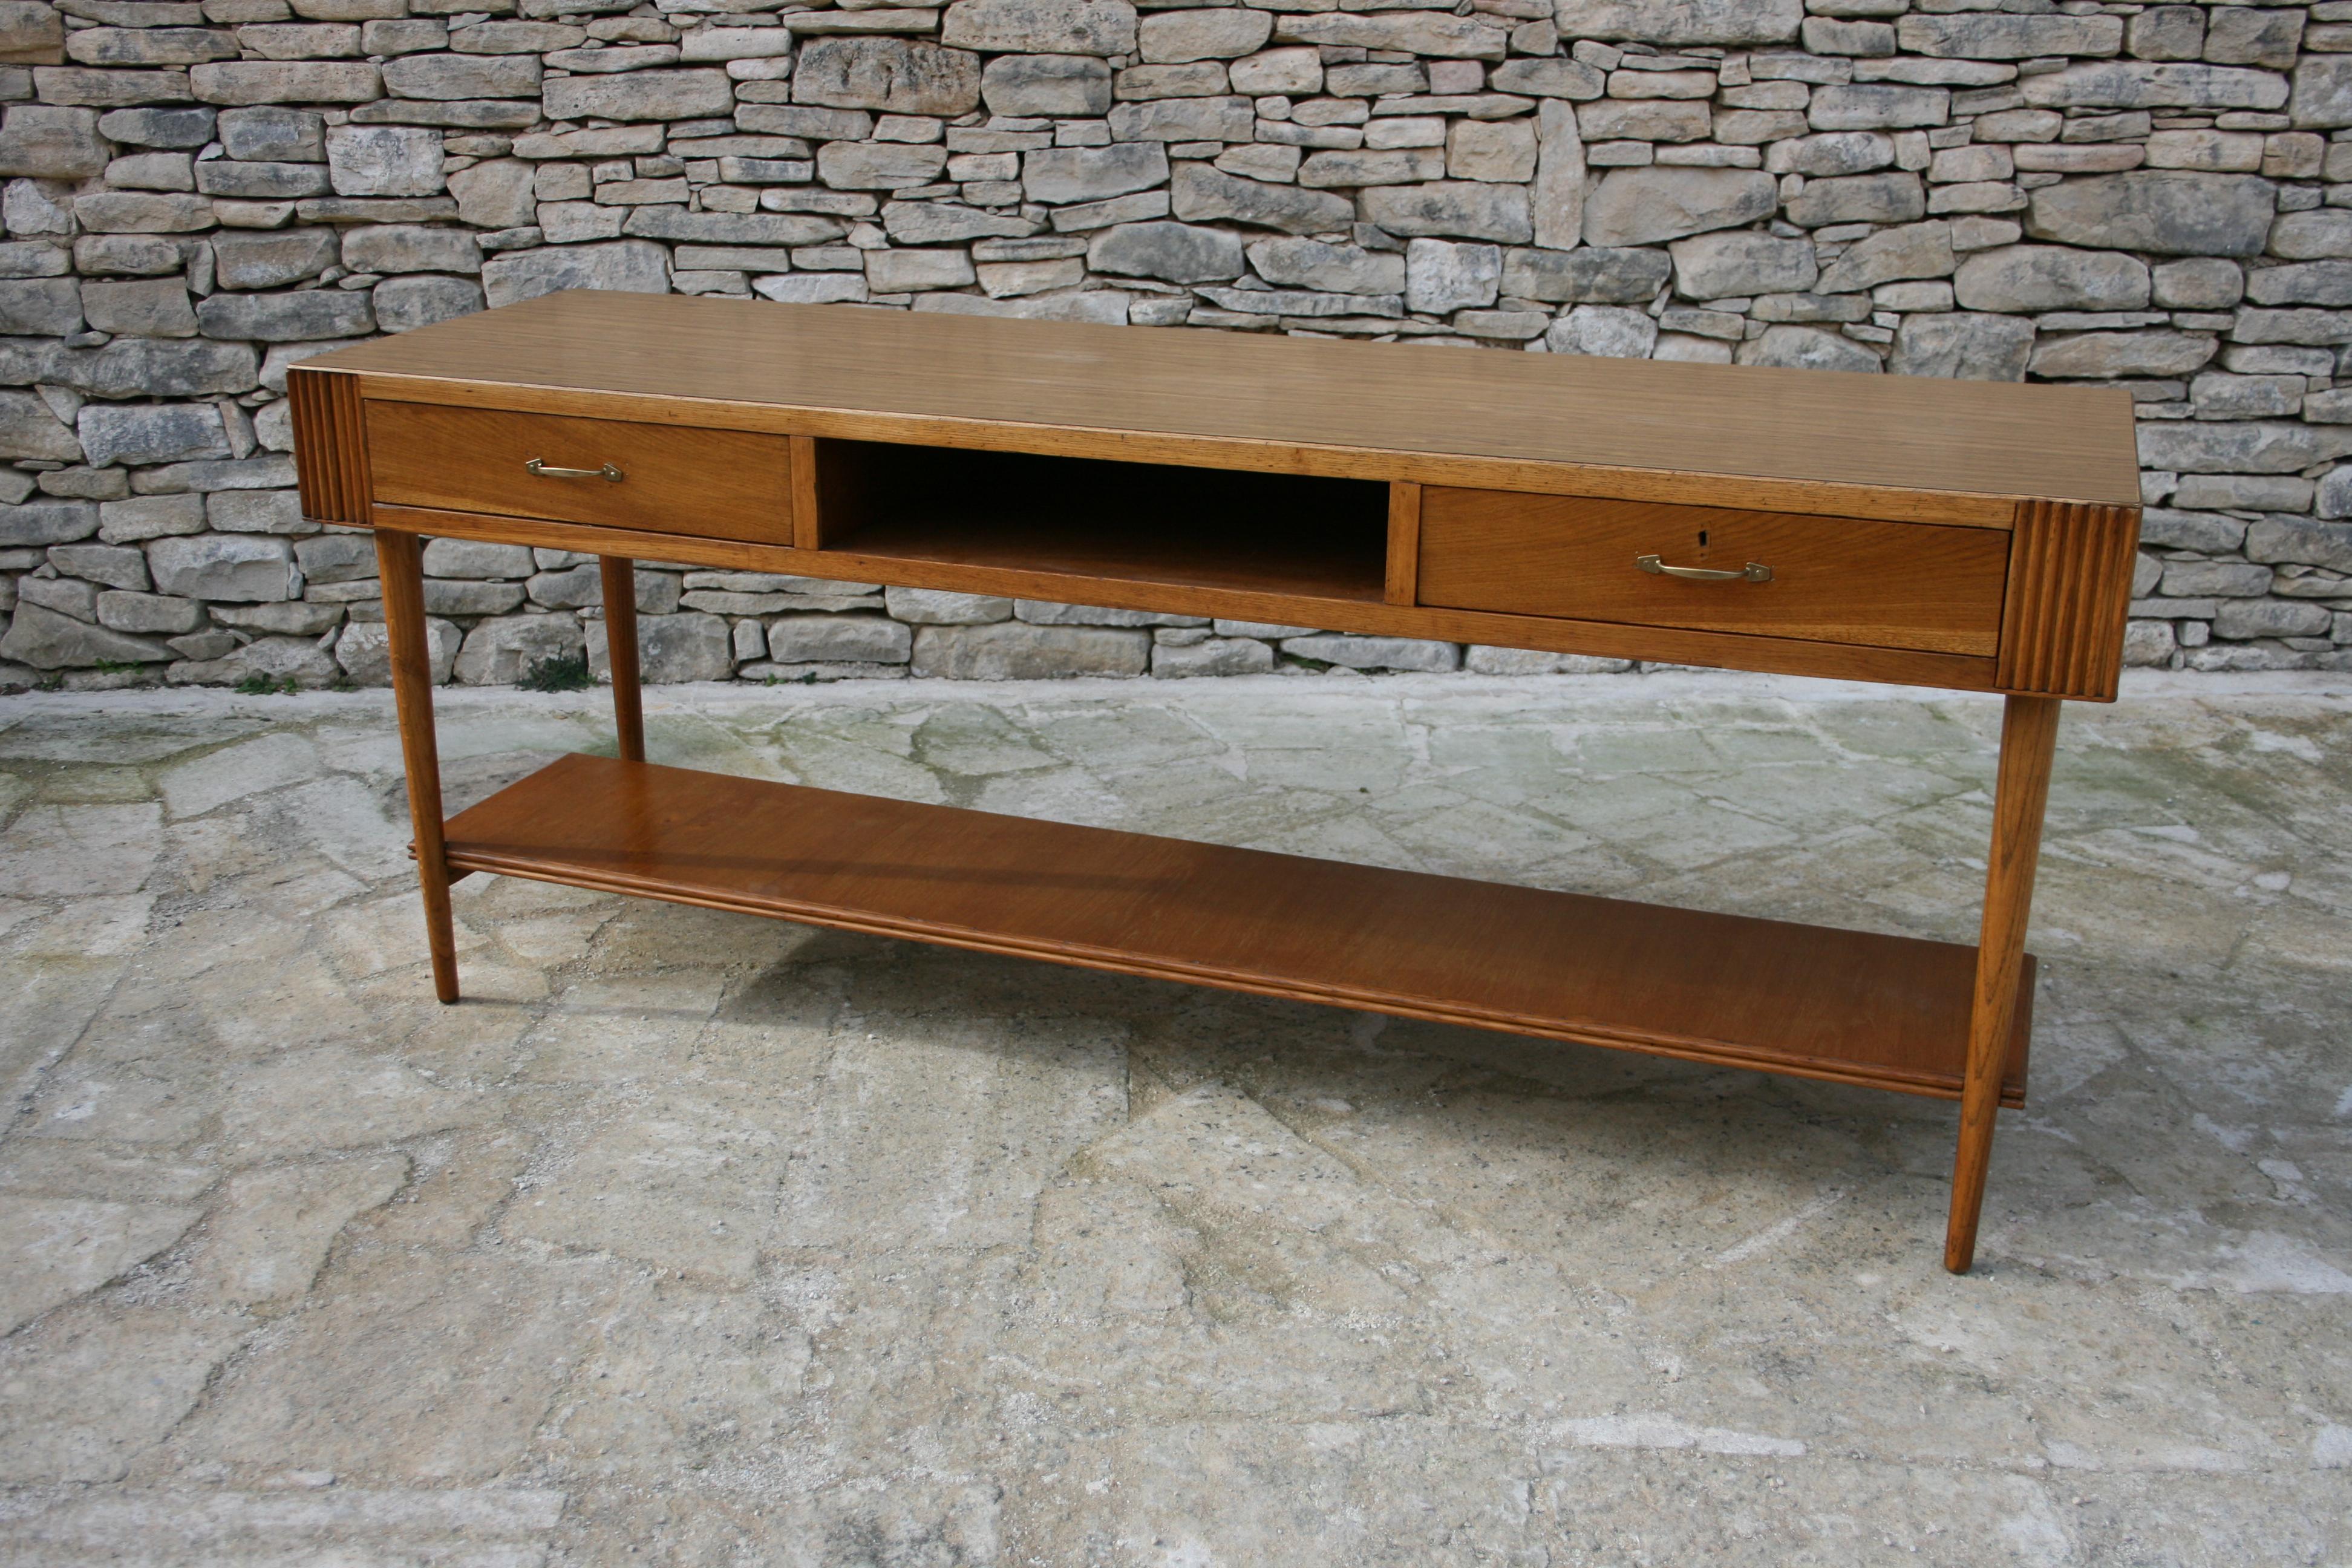 1950s Italian Large Bar/Console or Serving Table im Zustand „Gut“ im Angebot in Tetbury, Gloucestershire